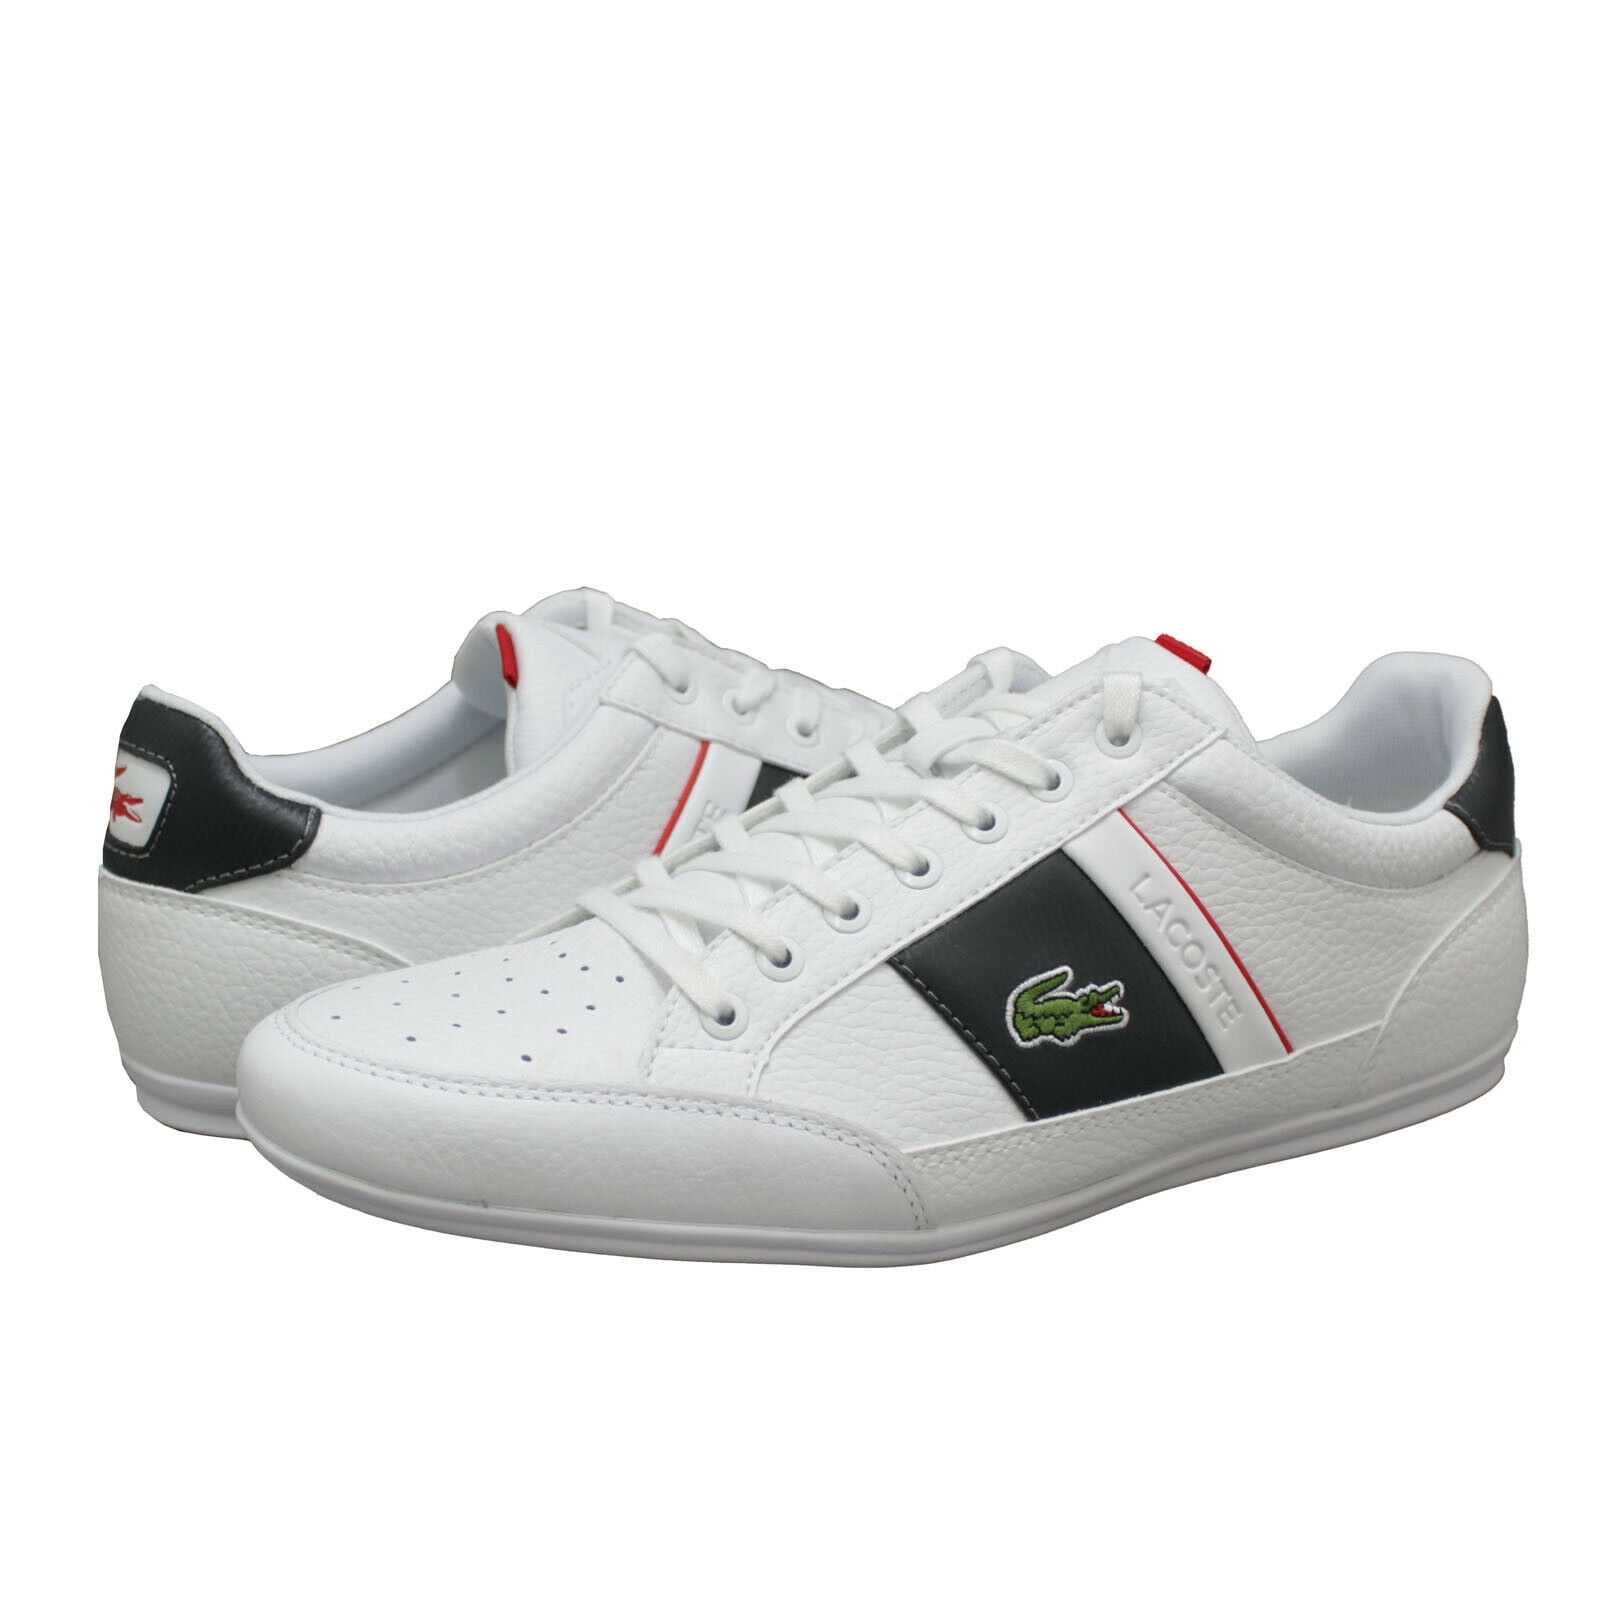 Lacoste Mens Chaymon 0721 1 CMA Textile Leather Casual Fashion Trainers Shoes